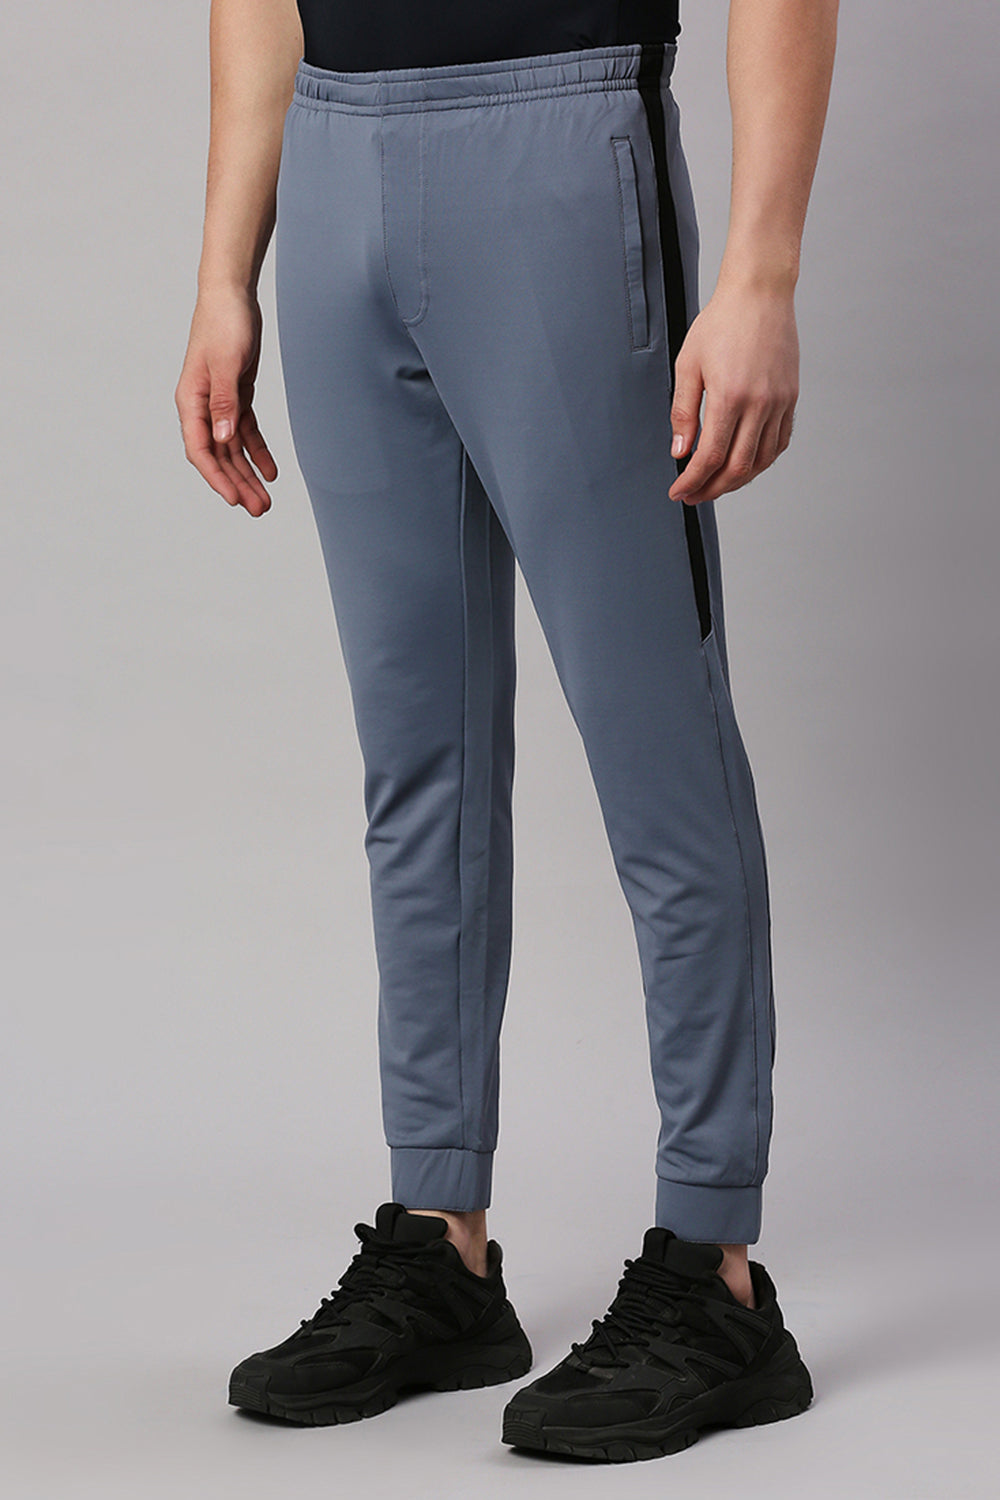 Elevate Workout Joggers